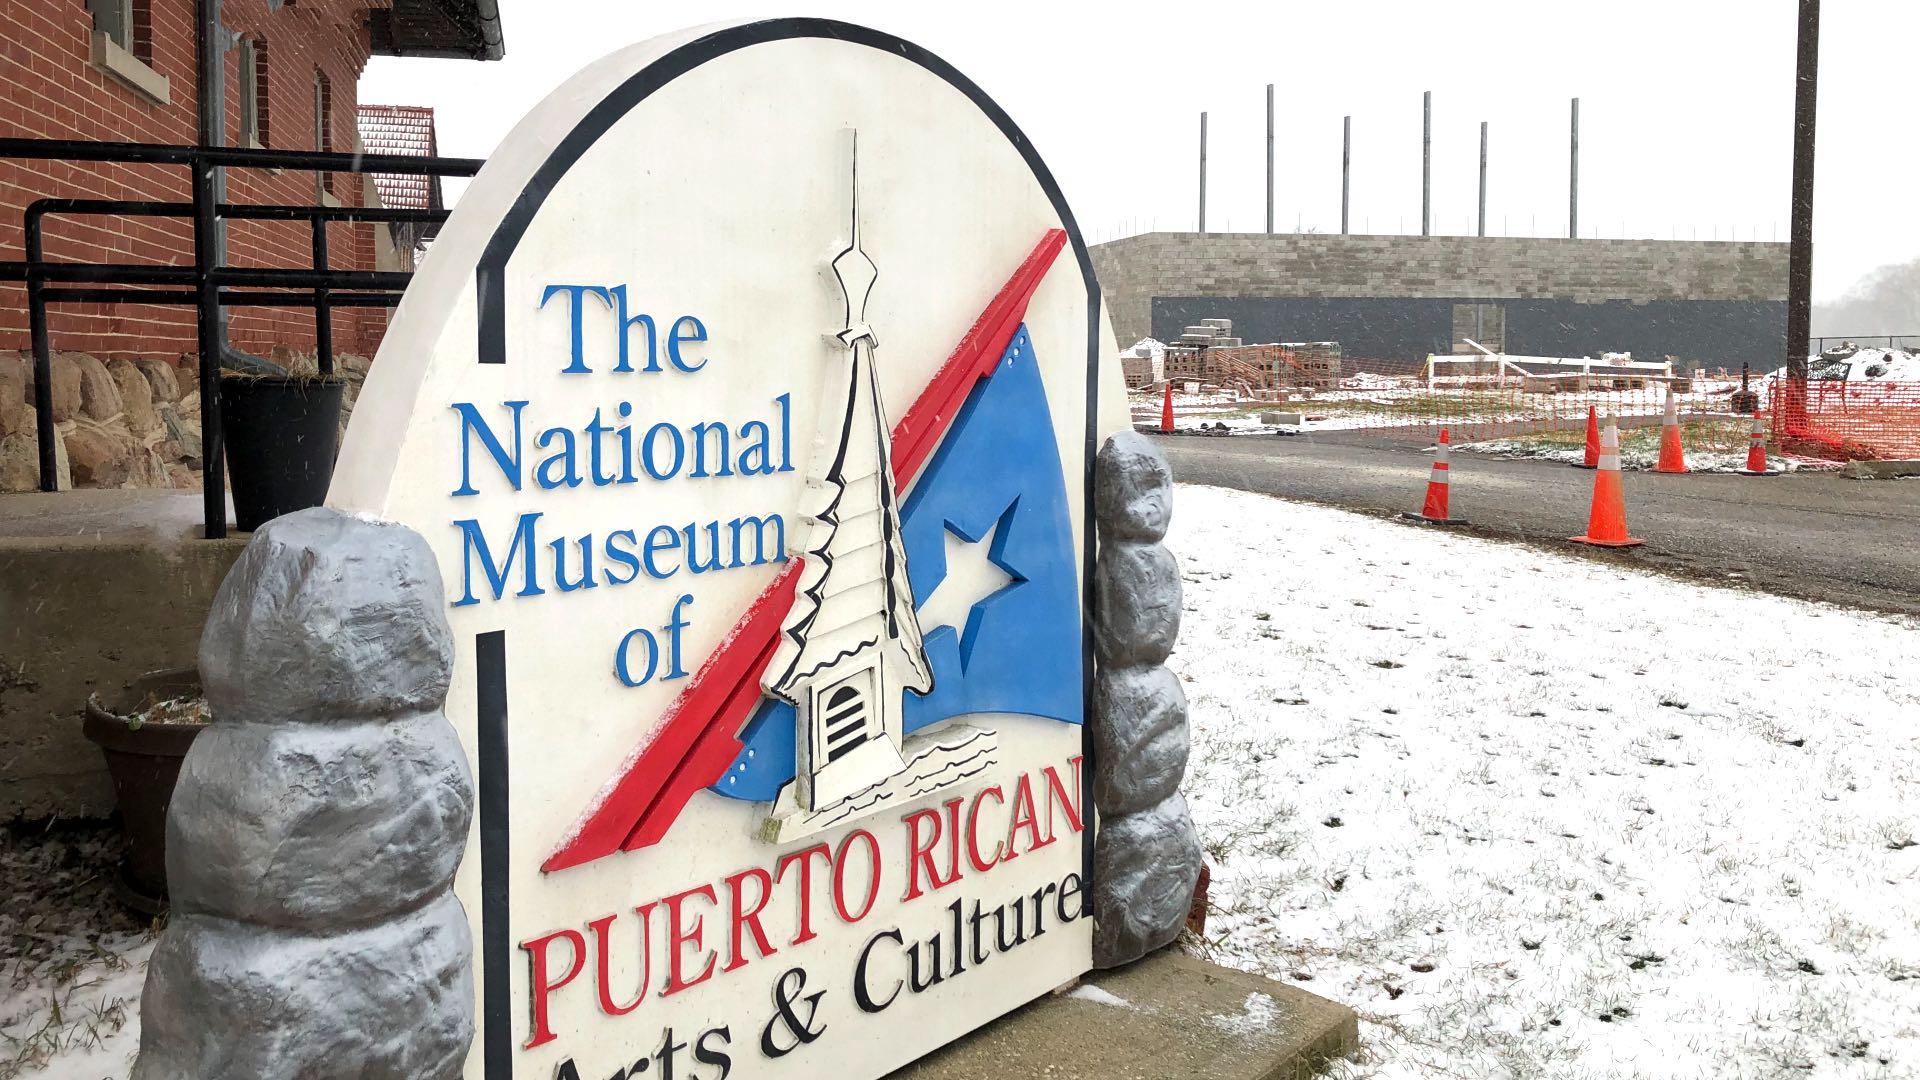 The National Museum of Puerto Rican Arts and Culture leases the Receptory Building and Stable in Humboldt Park for $1 per year. The archive facility seen in rear. (Patty Wetli / WTTW News)